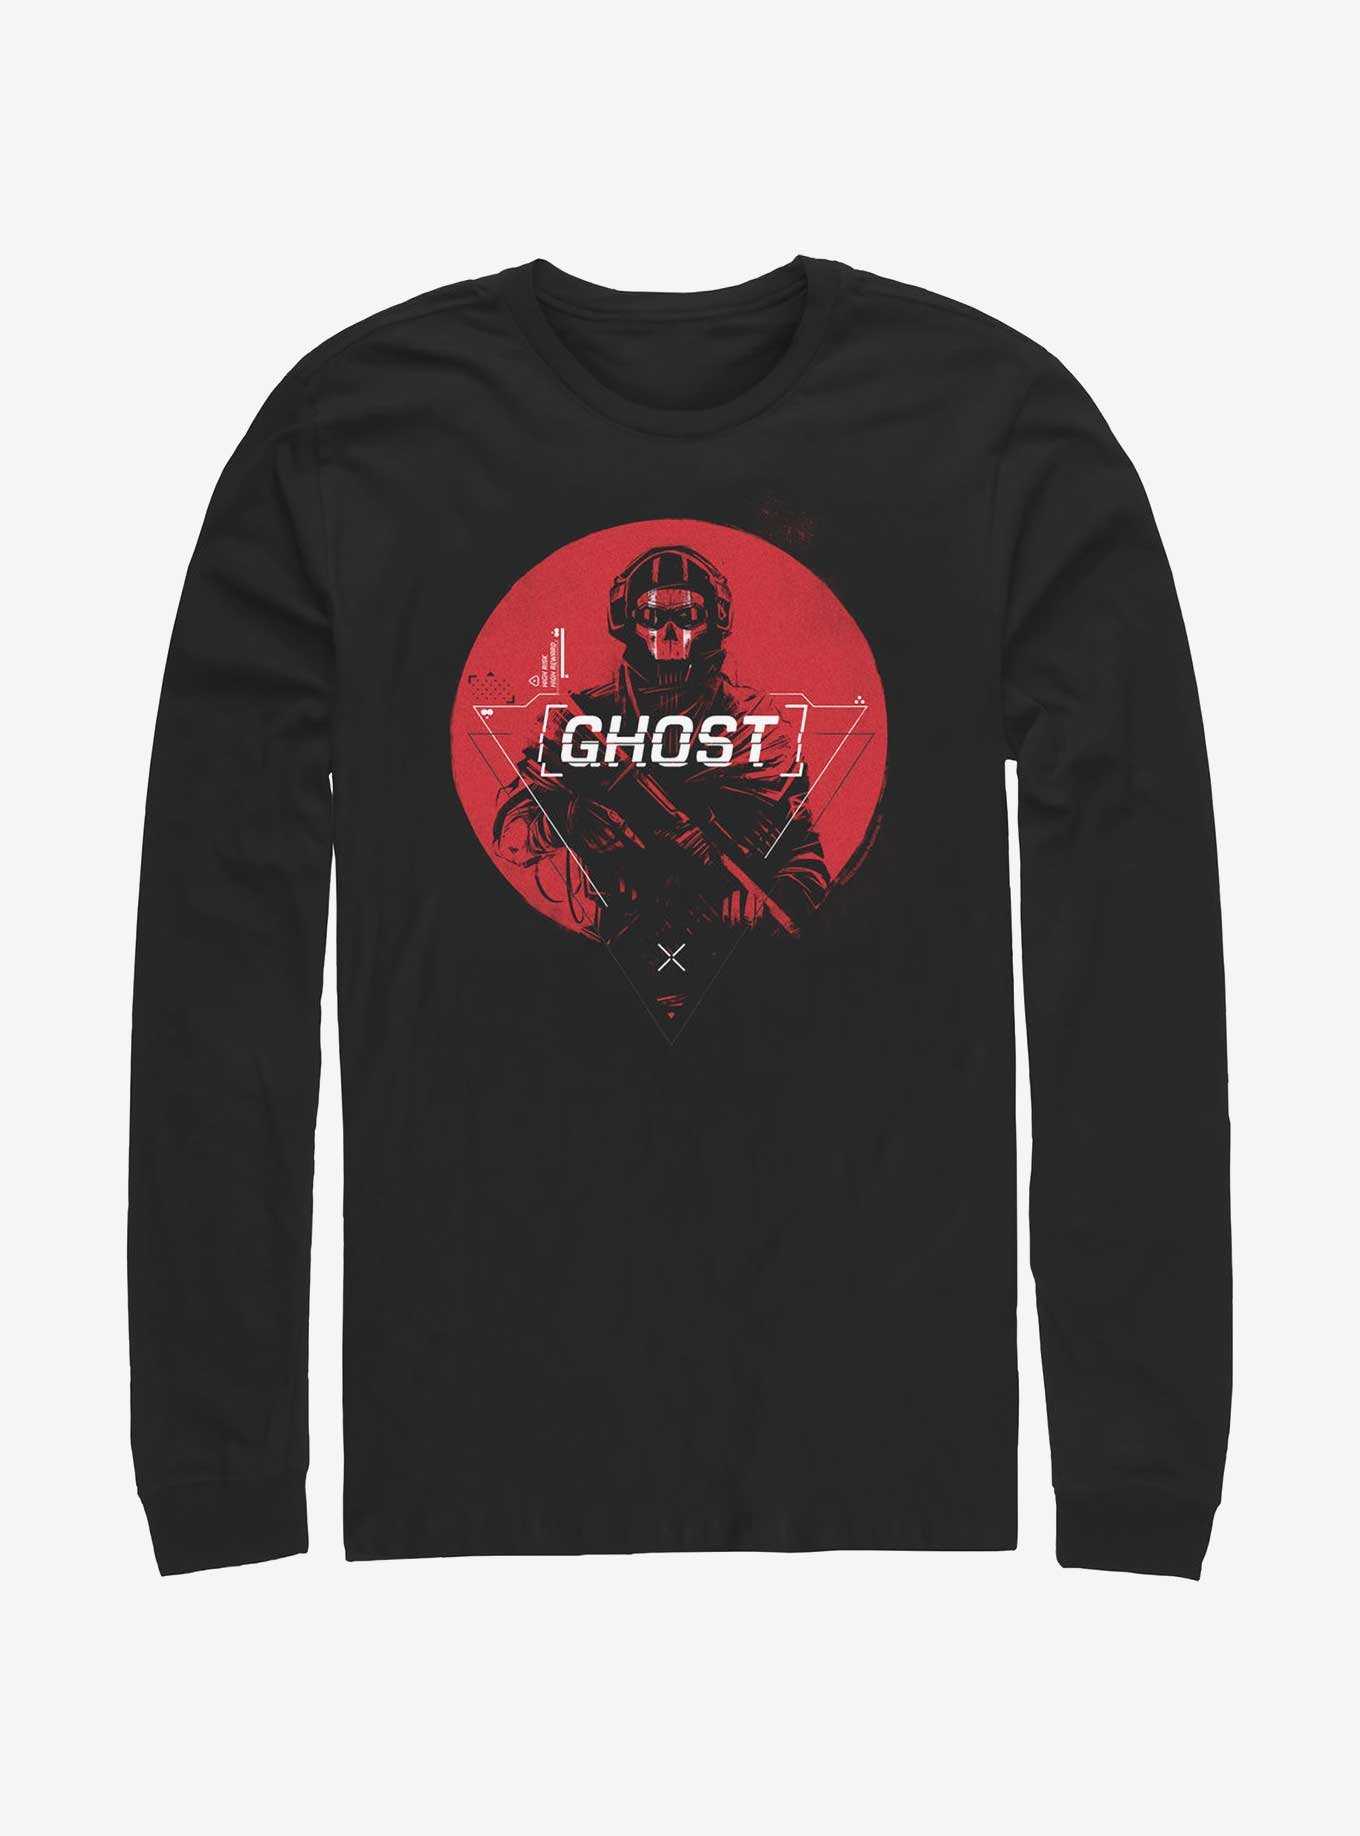 Call of Duty Ghost Glitch Long-Sleeve T-Shirt, , hi-res